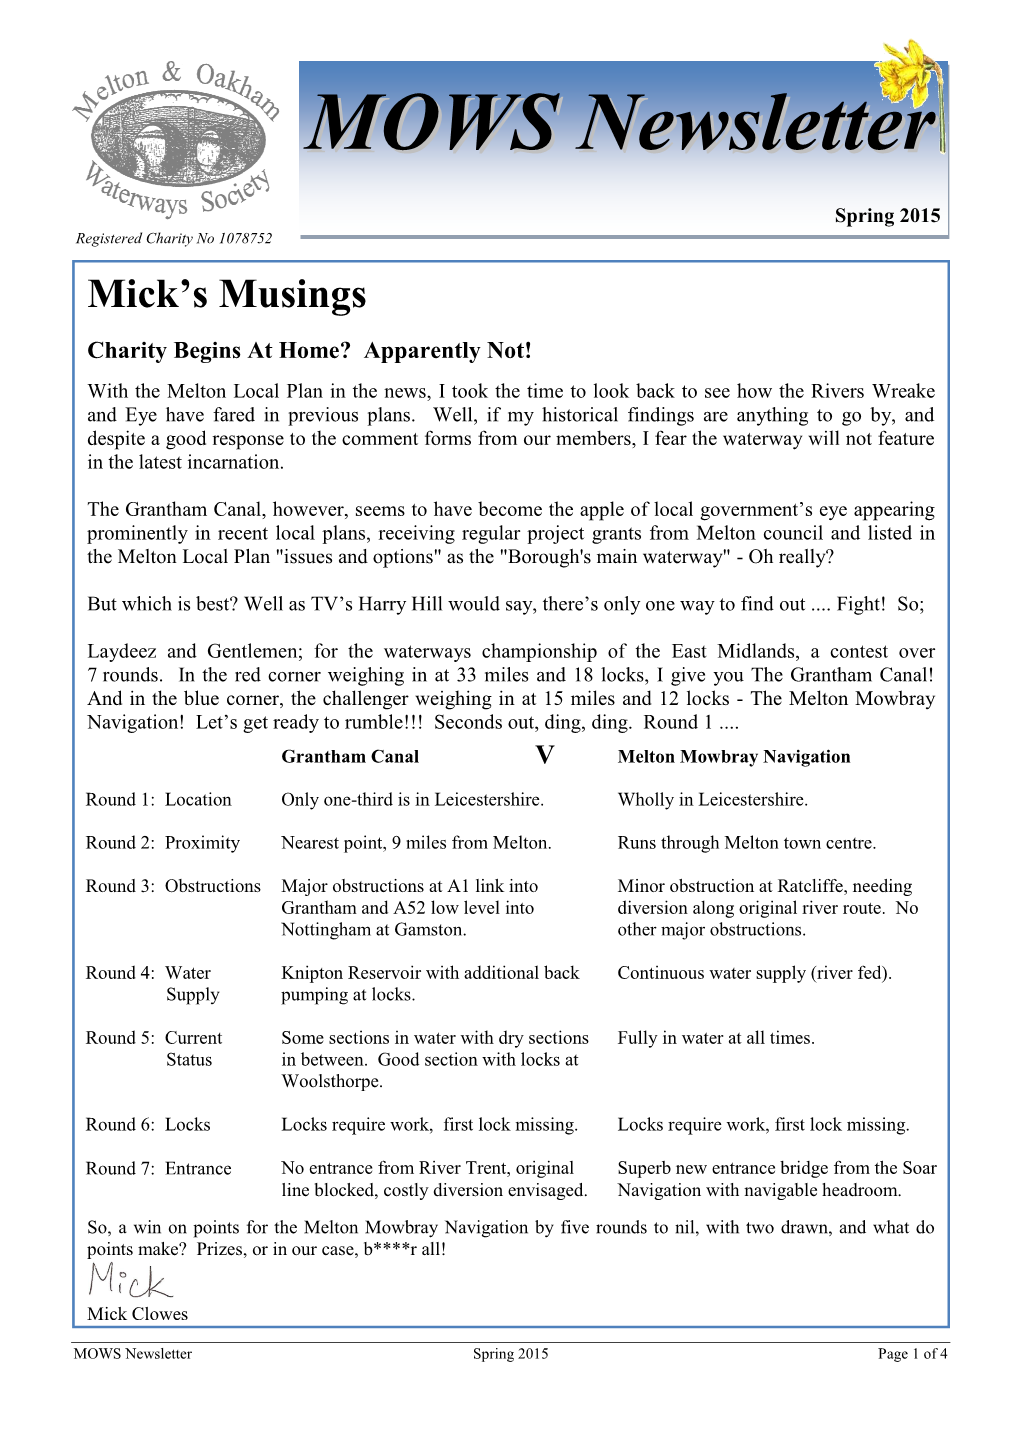 MOWS Newsletter Spring 2015 Page 1 of 4